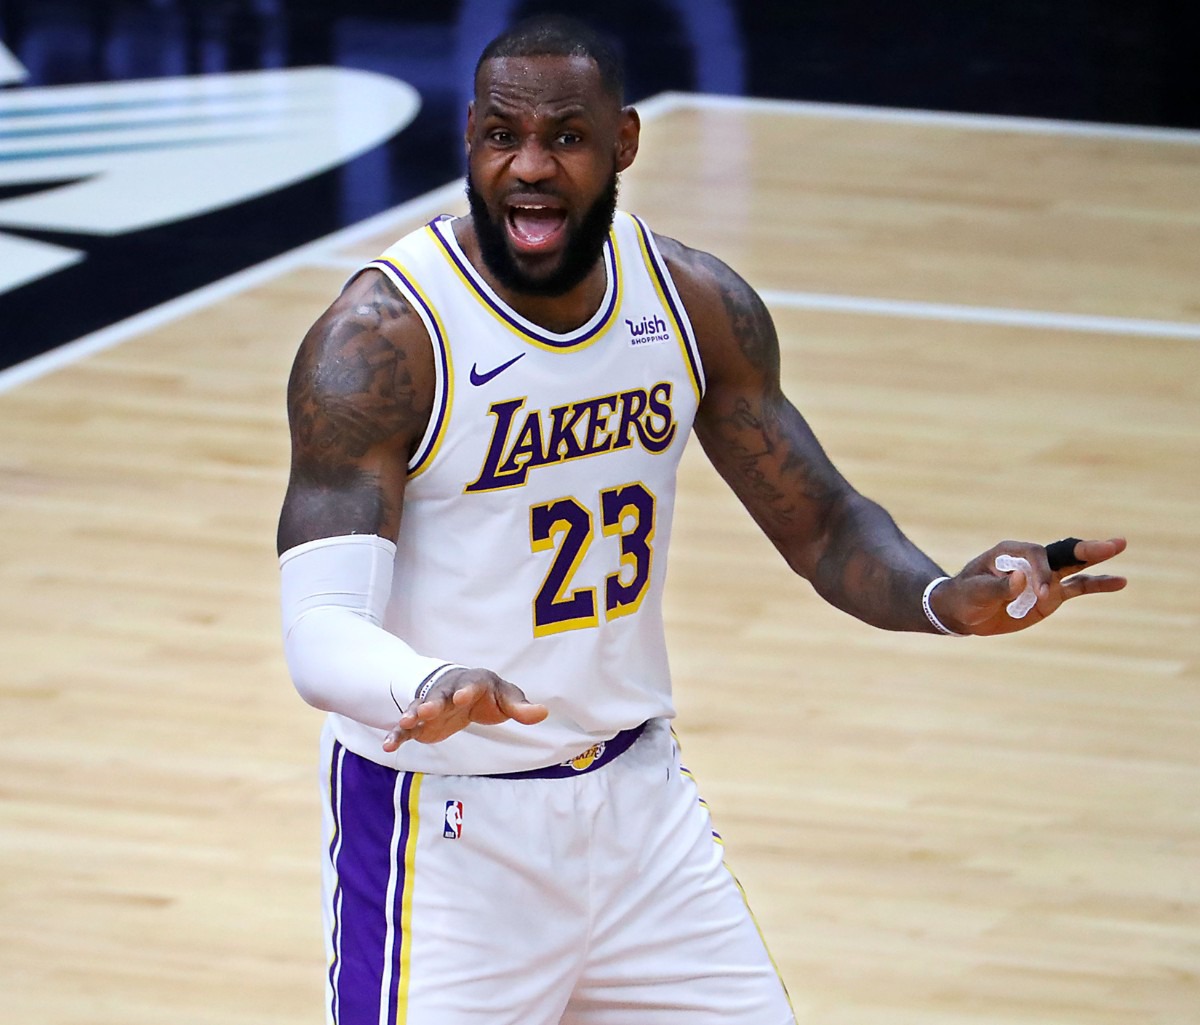 <strong>Los Angeles Lakers forward LeBron James (23) argues a call during a Jan. 3, 2021 game against the Memphis Grizzlies at the FedExForum.</strong> (Patrick Lantrip/Daily Memphian)